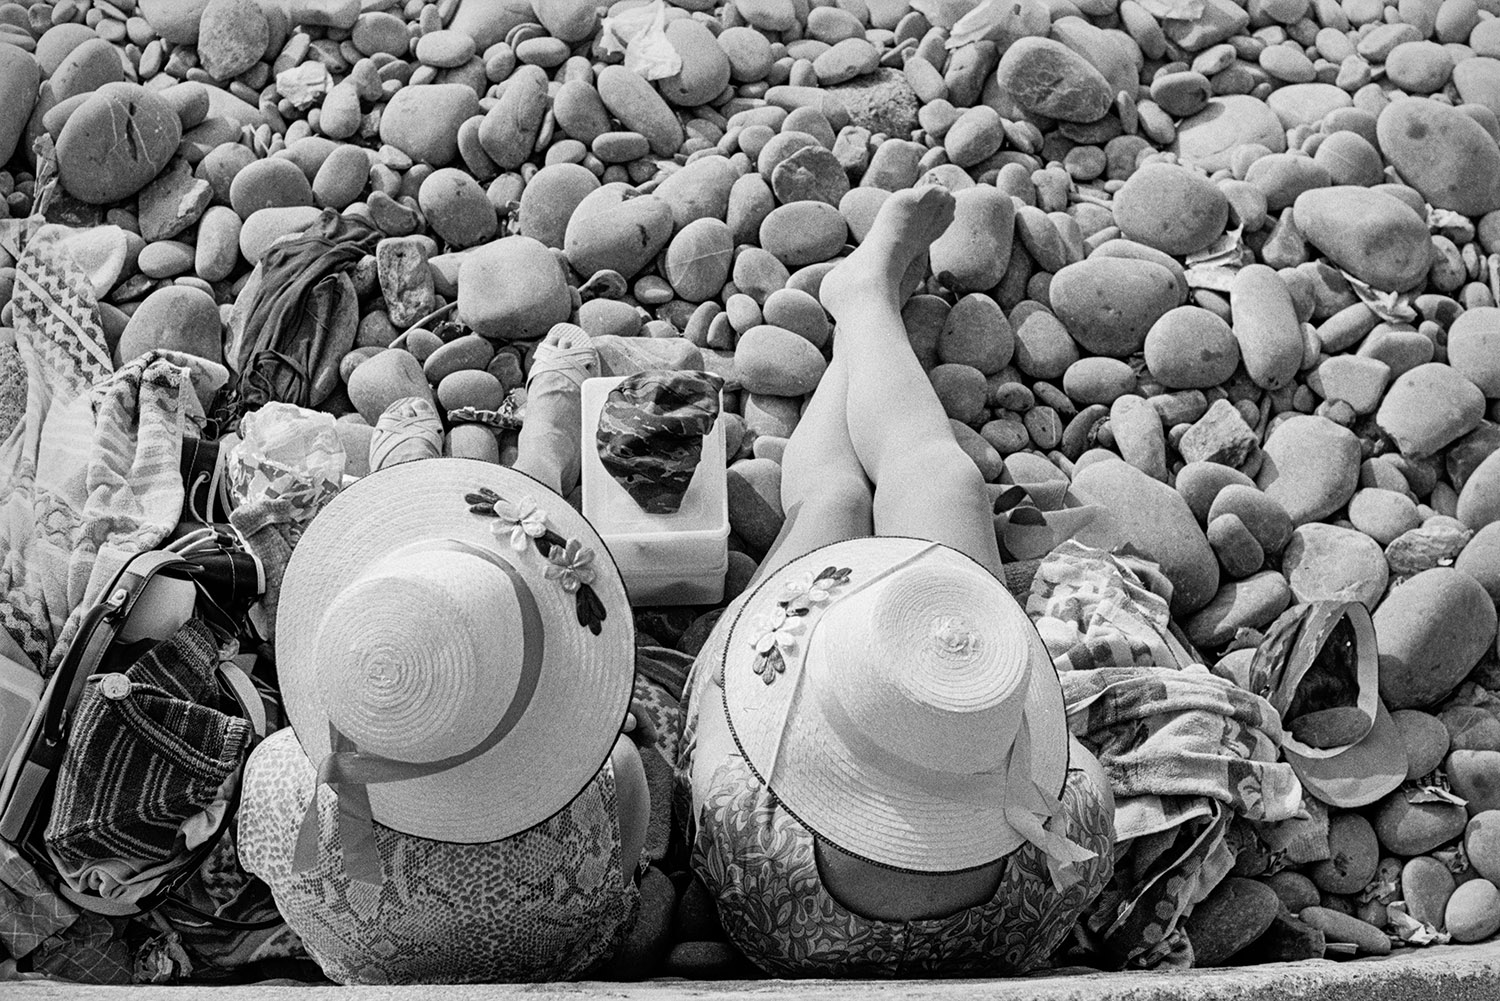 Two women, wearing sun hats, sat on a pebble beach with bags.